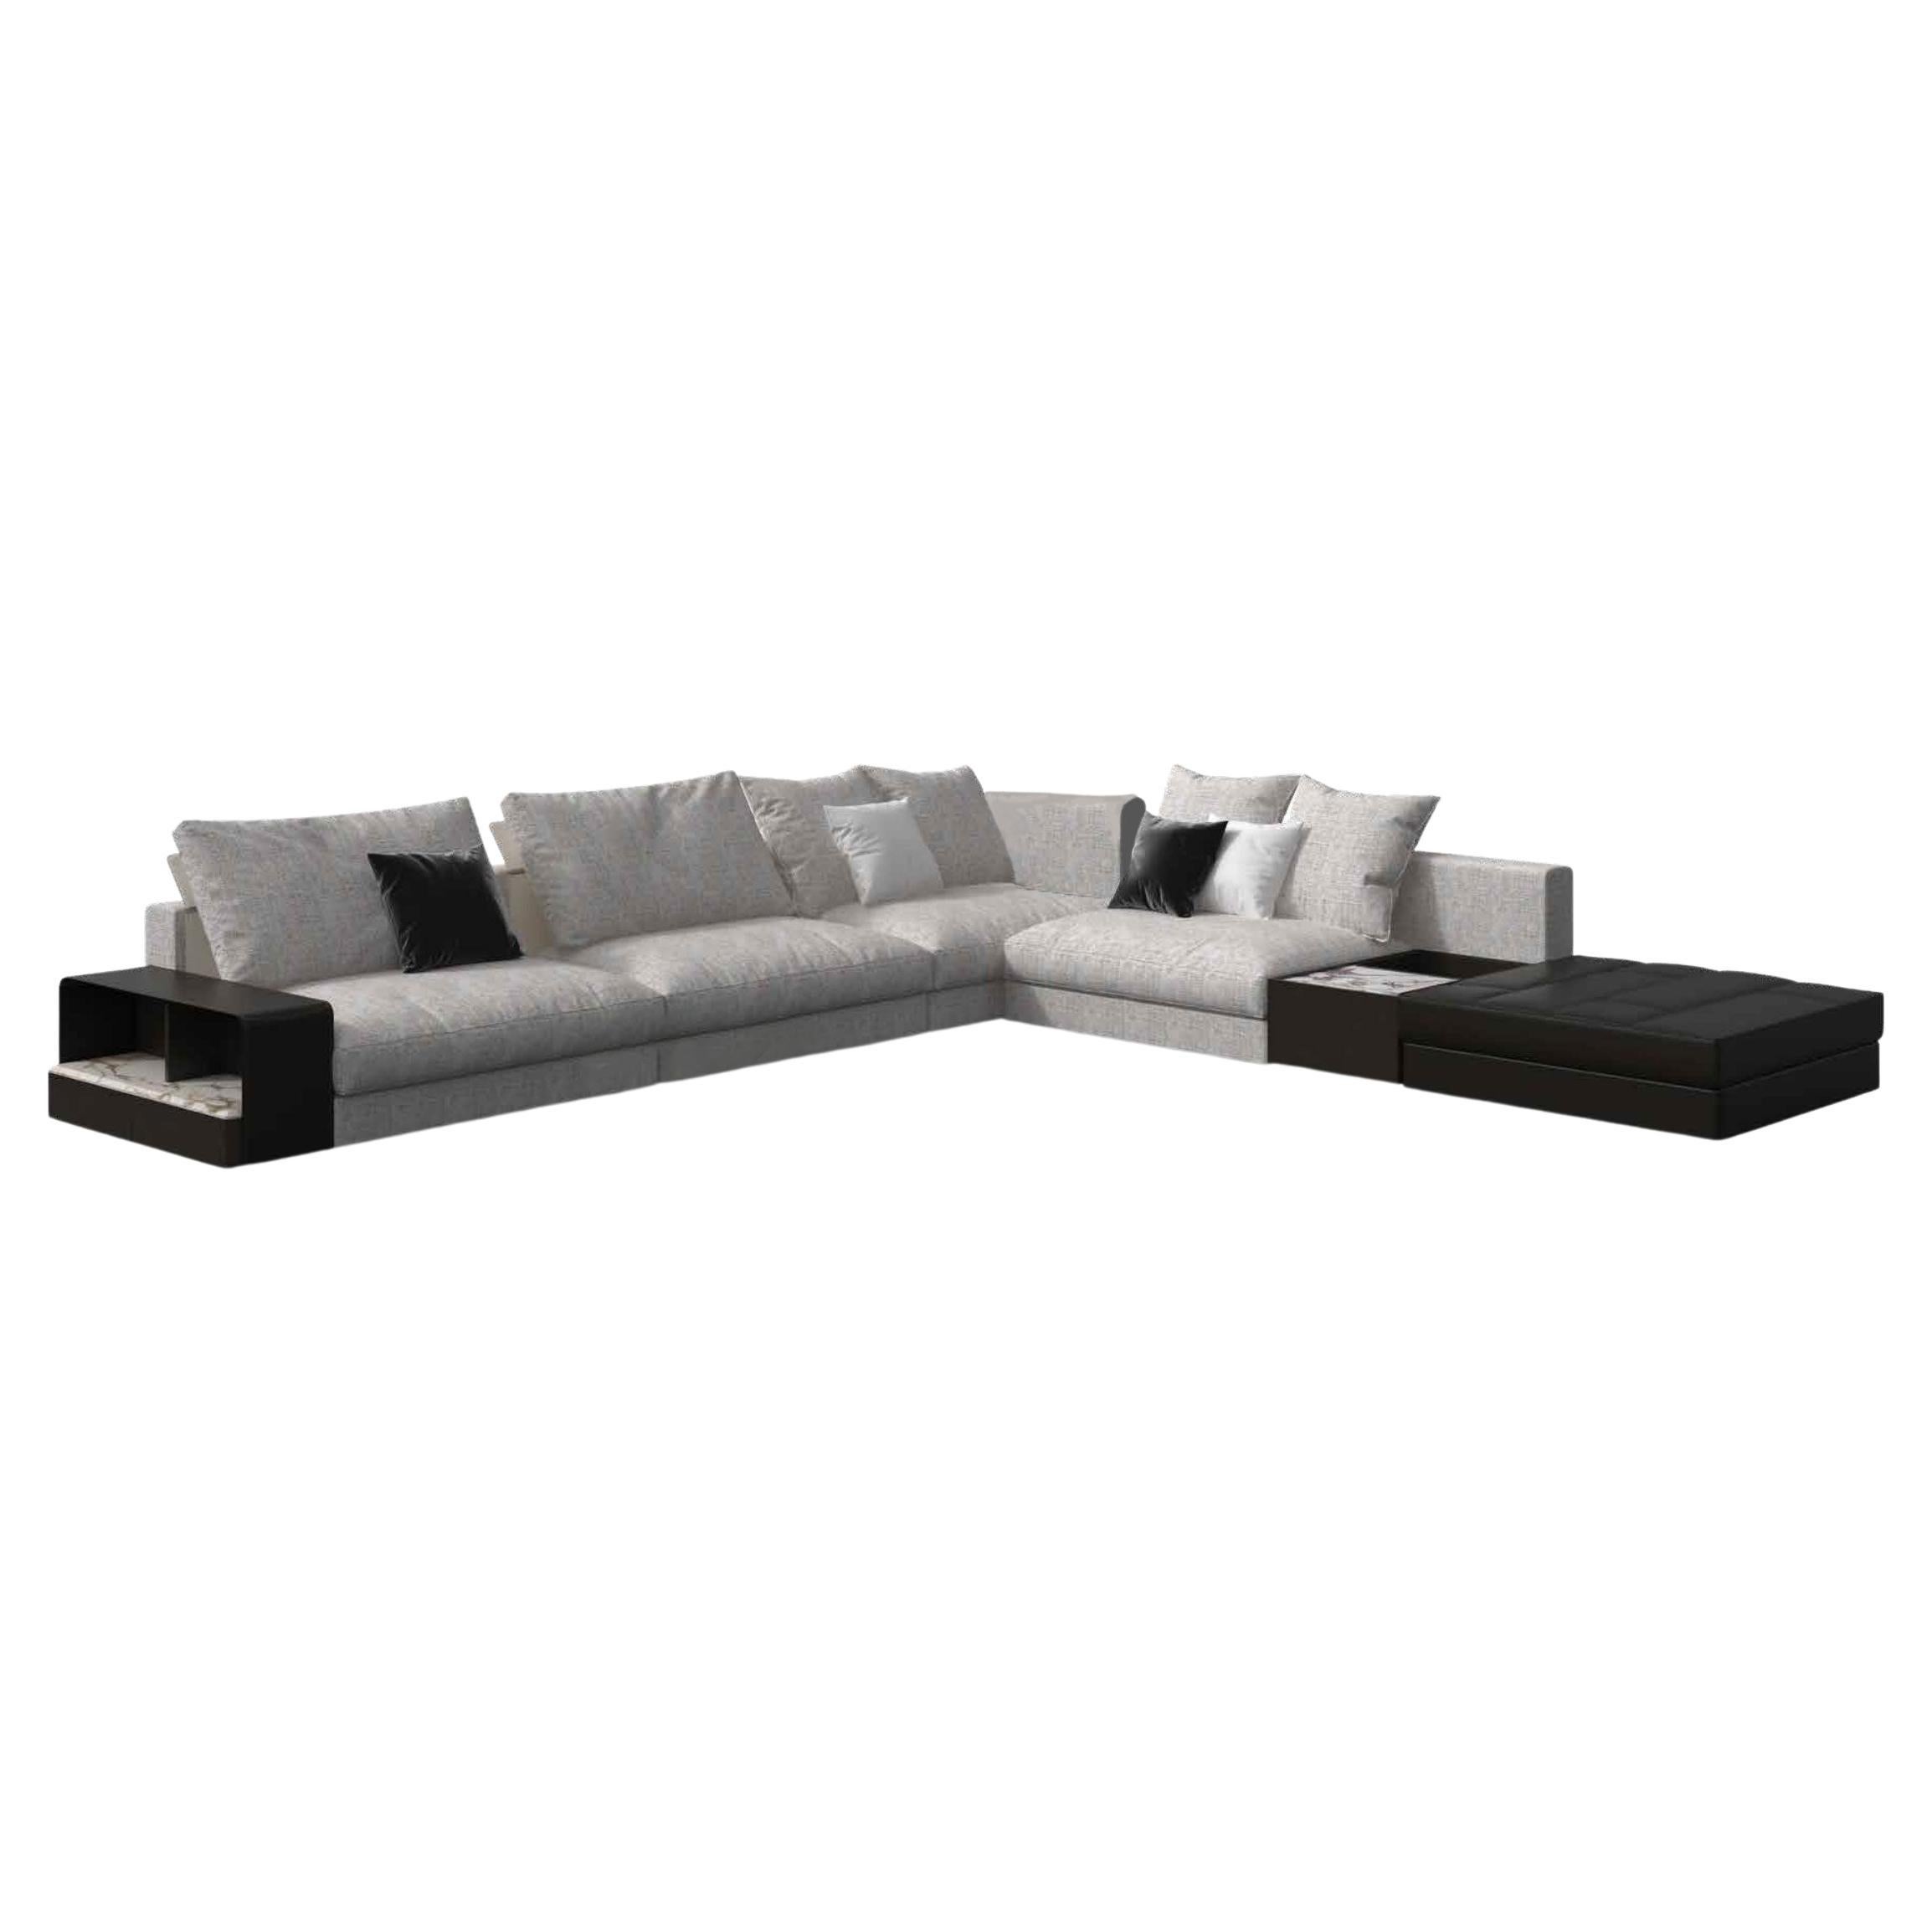 Giorgetti Skyline Sectional Sofa by Carlo Colombo   For Sale